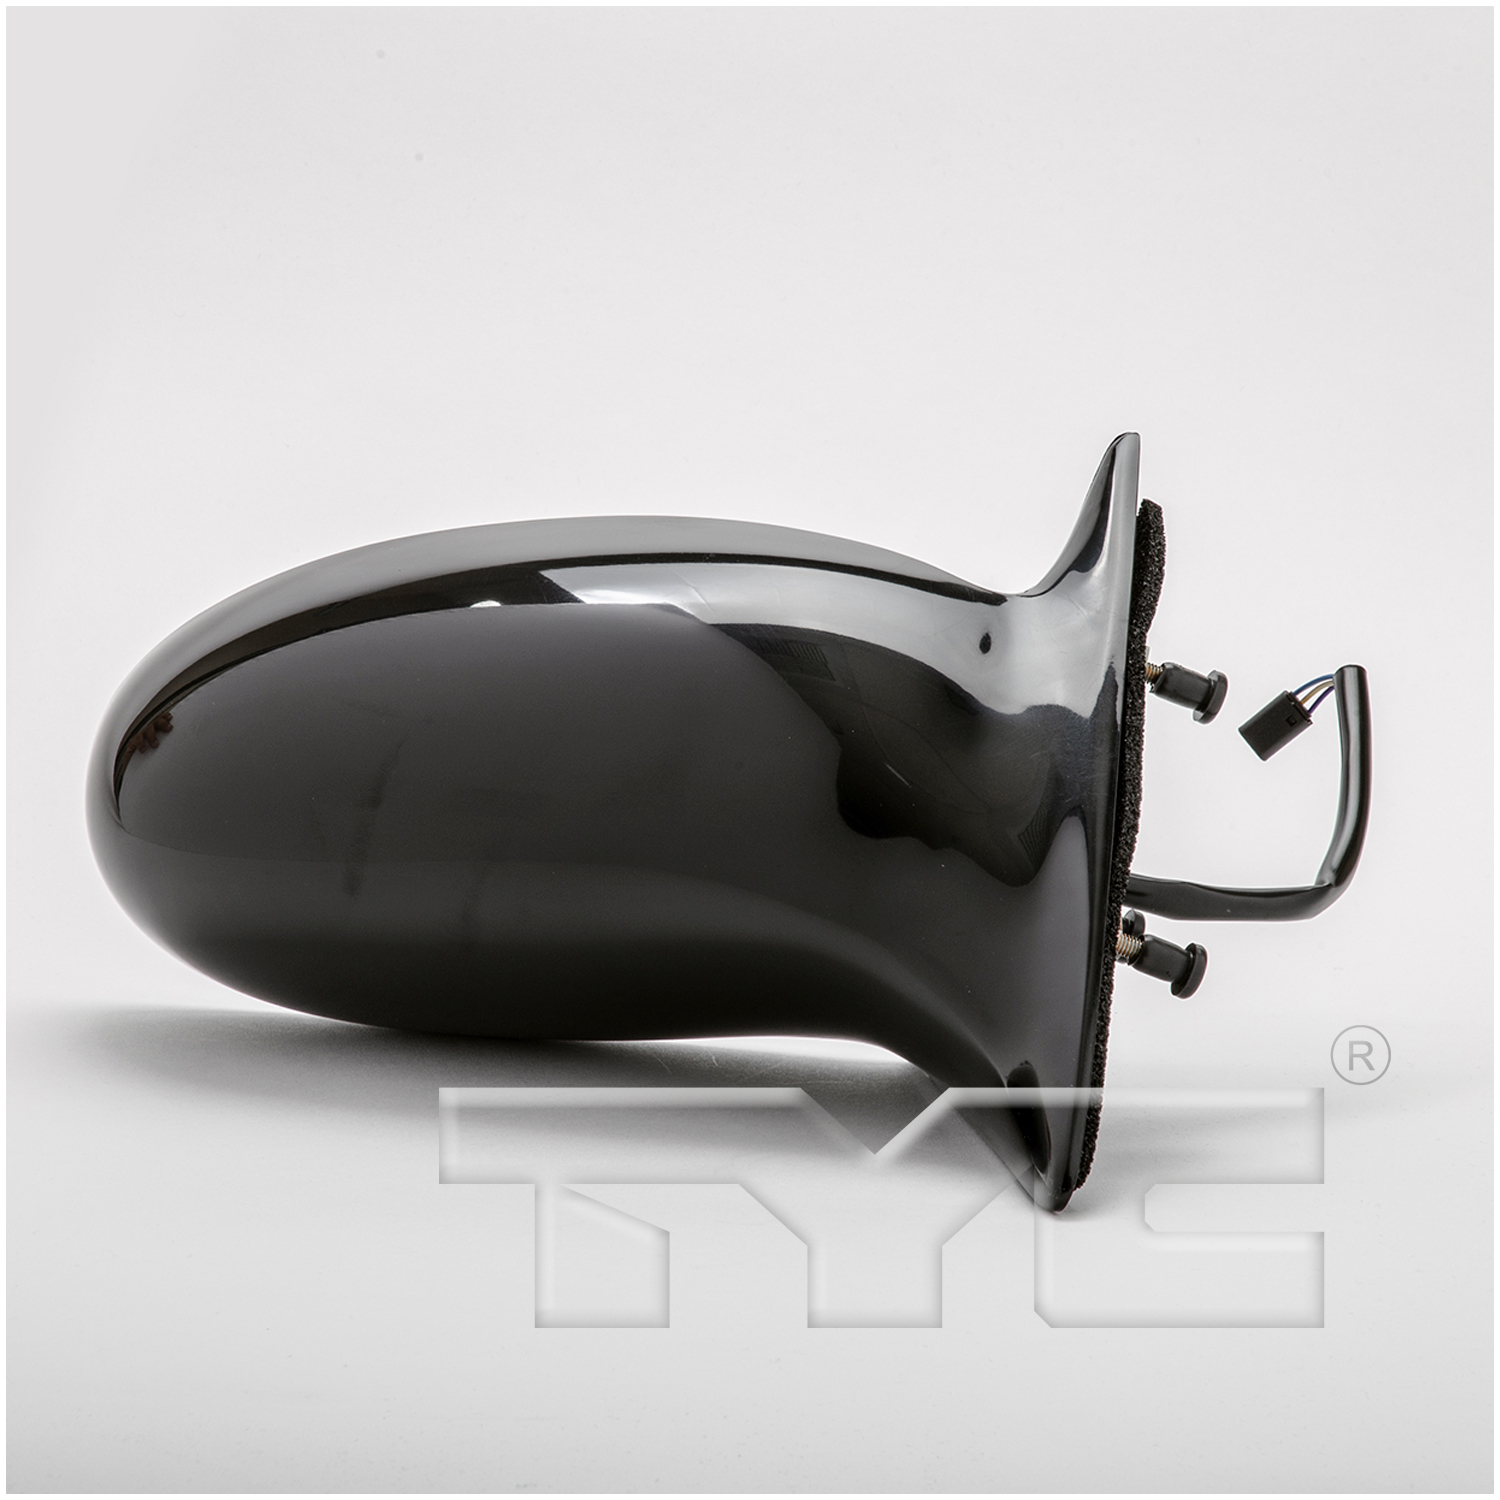 Aftermarket MIRRORS for PONTIAC - GRAND AM, GRAND AM,02-05,RT Mirror outside rear view